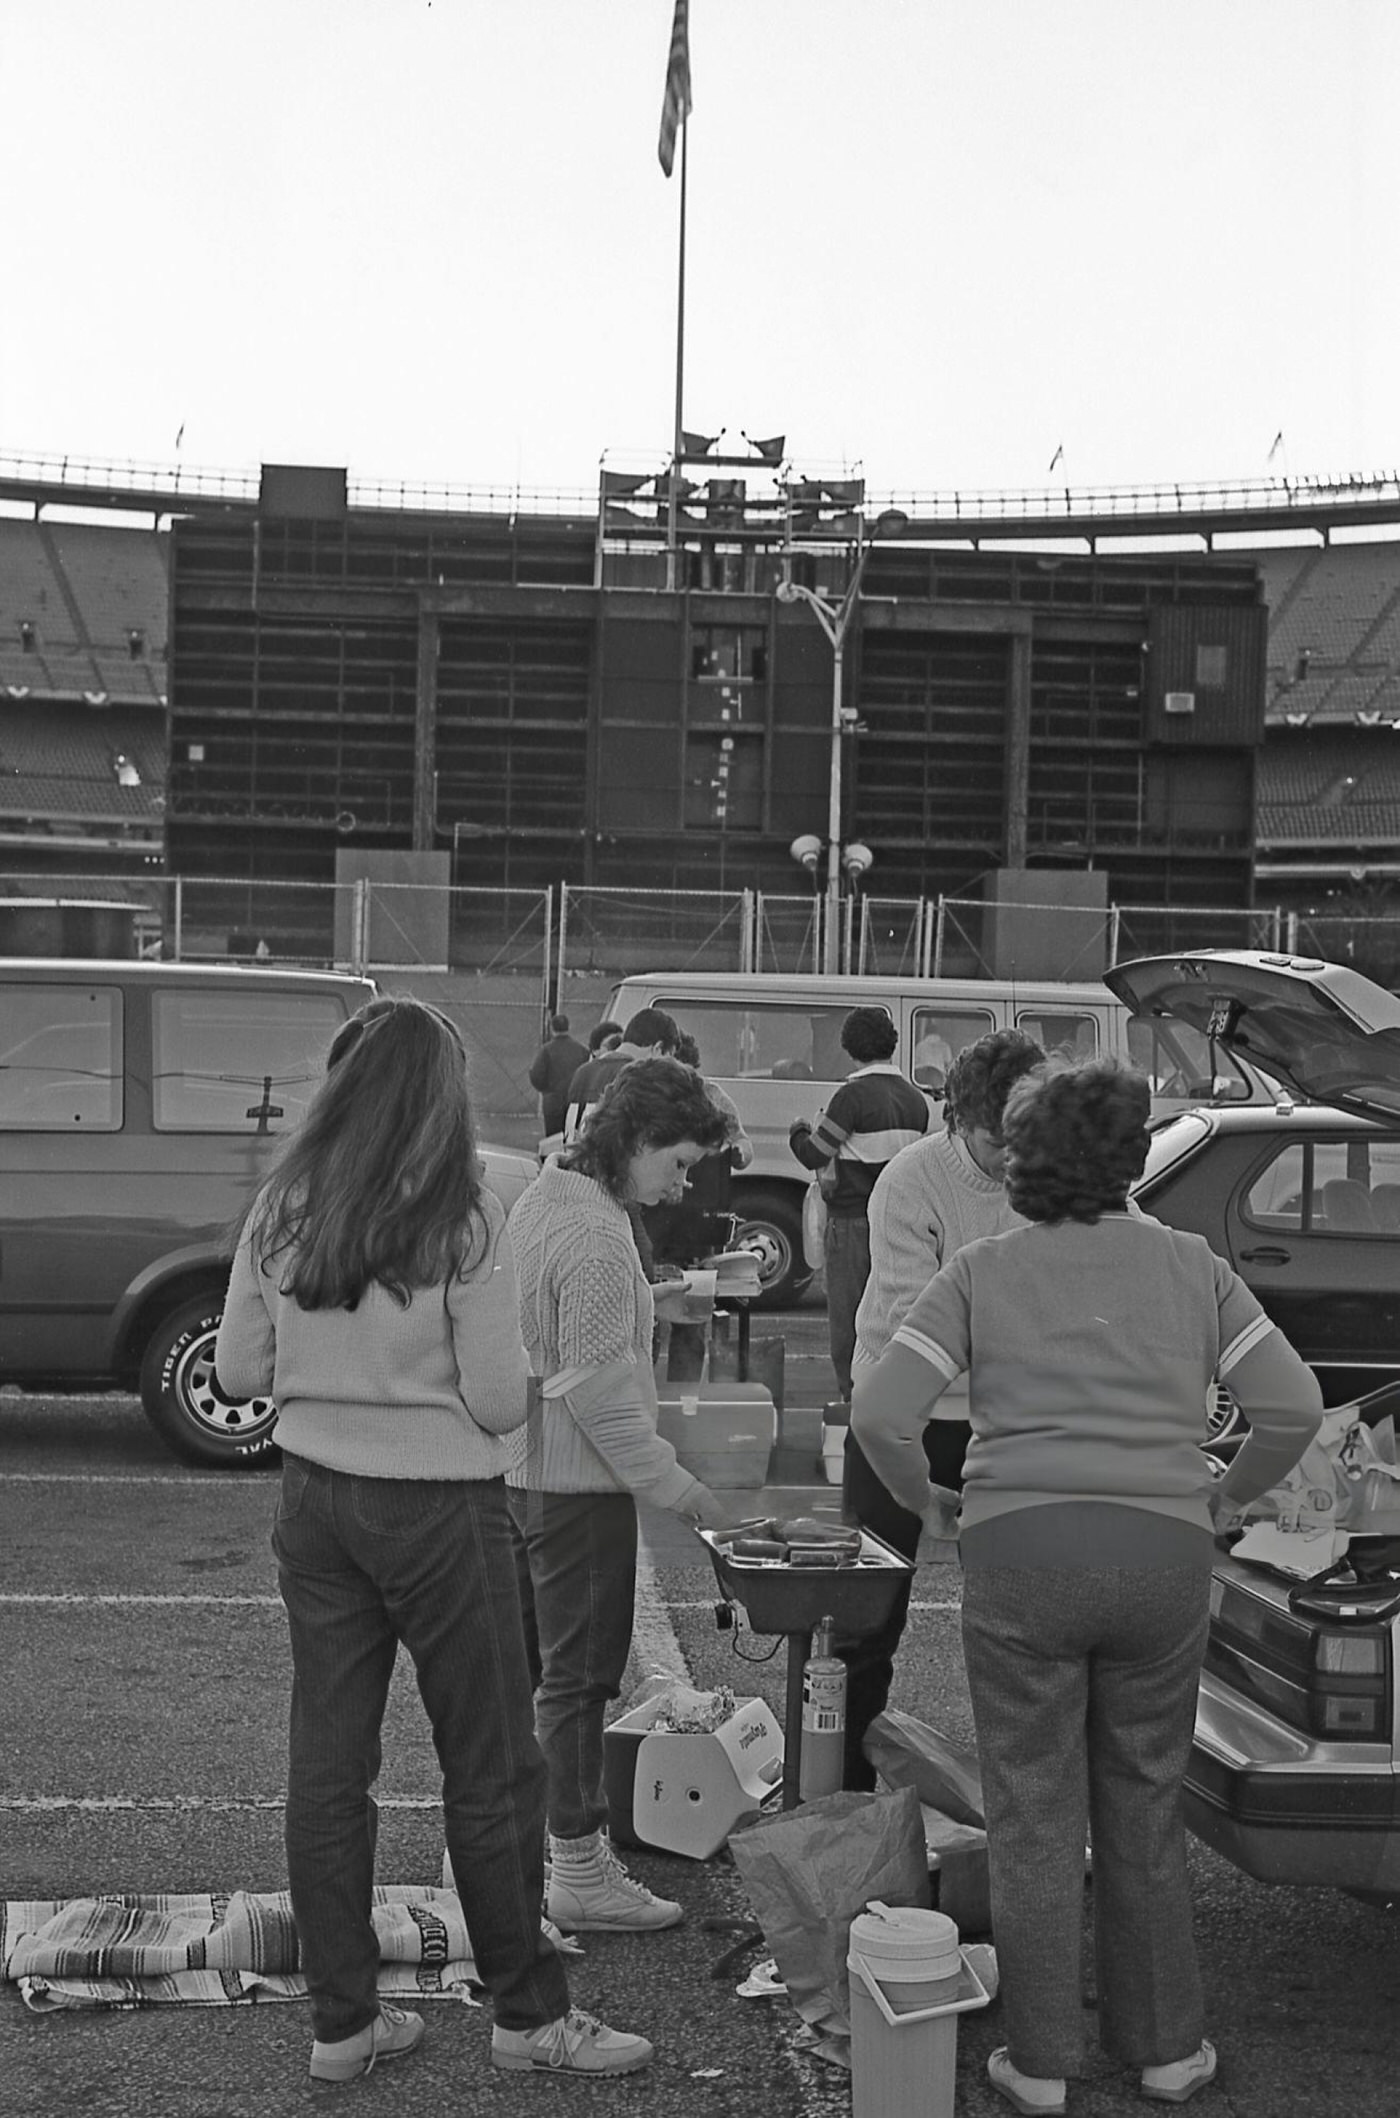 Baseball Fans Tailgate In A Parking Lot Outside Shea Stadium Before Game Six Of The 1986 World Series, Corona, Queens, 1986.